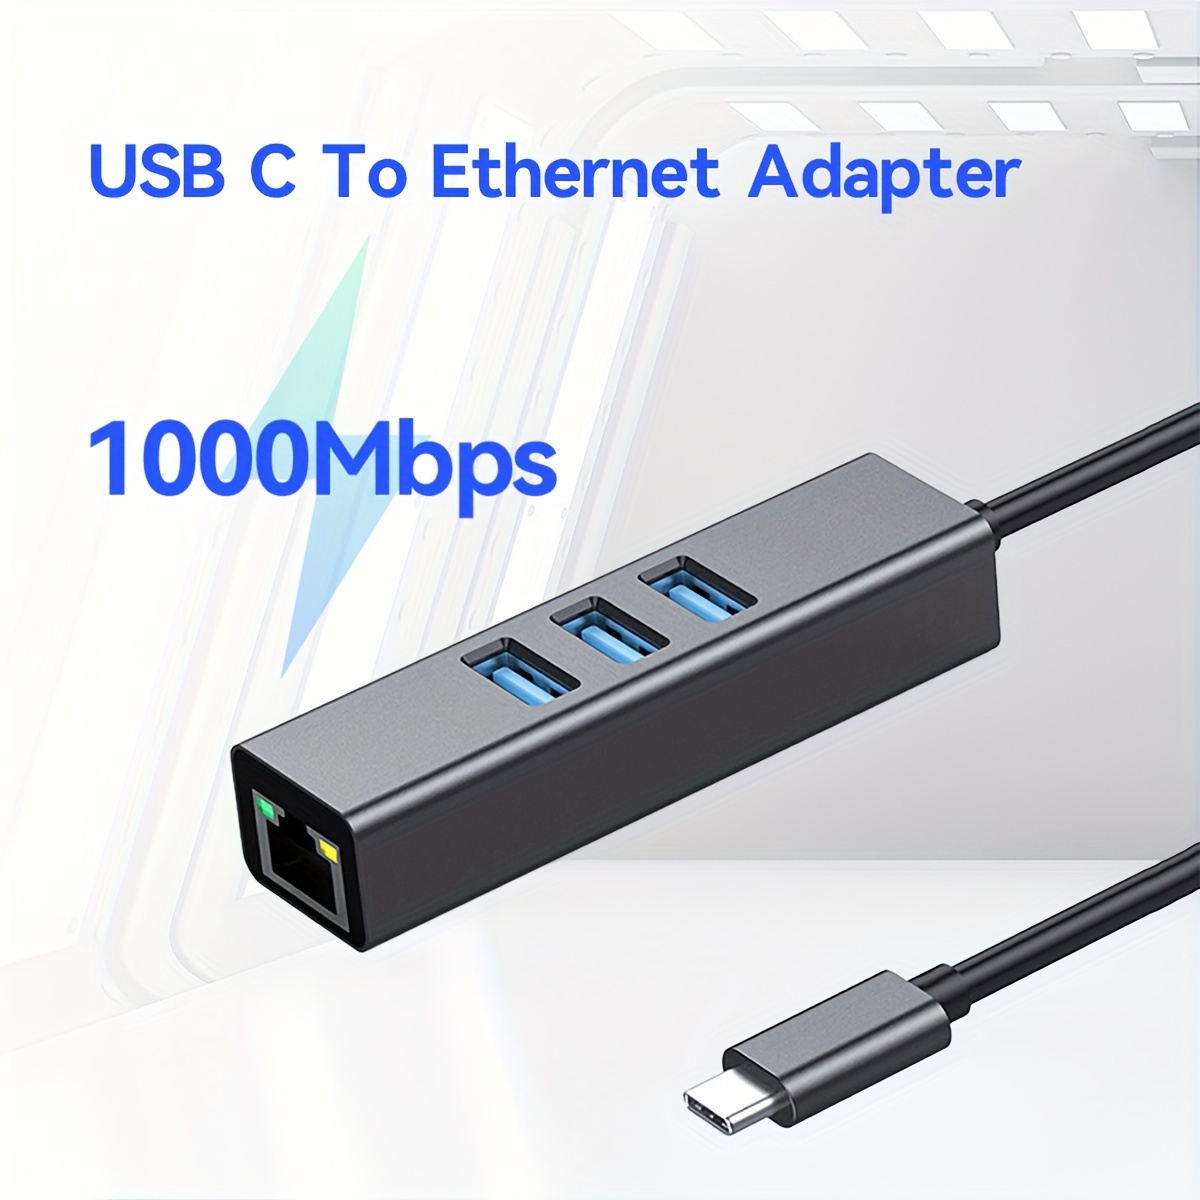 USB 3.0 to Ethernet Adapter,3-Port USB 3.0 Hub with RJ45 10/100/1000  Gigabit Ethernet Adapter Support Windows 10,8.1,Mac OS, Surface